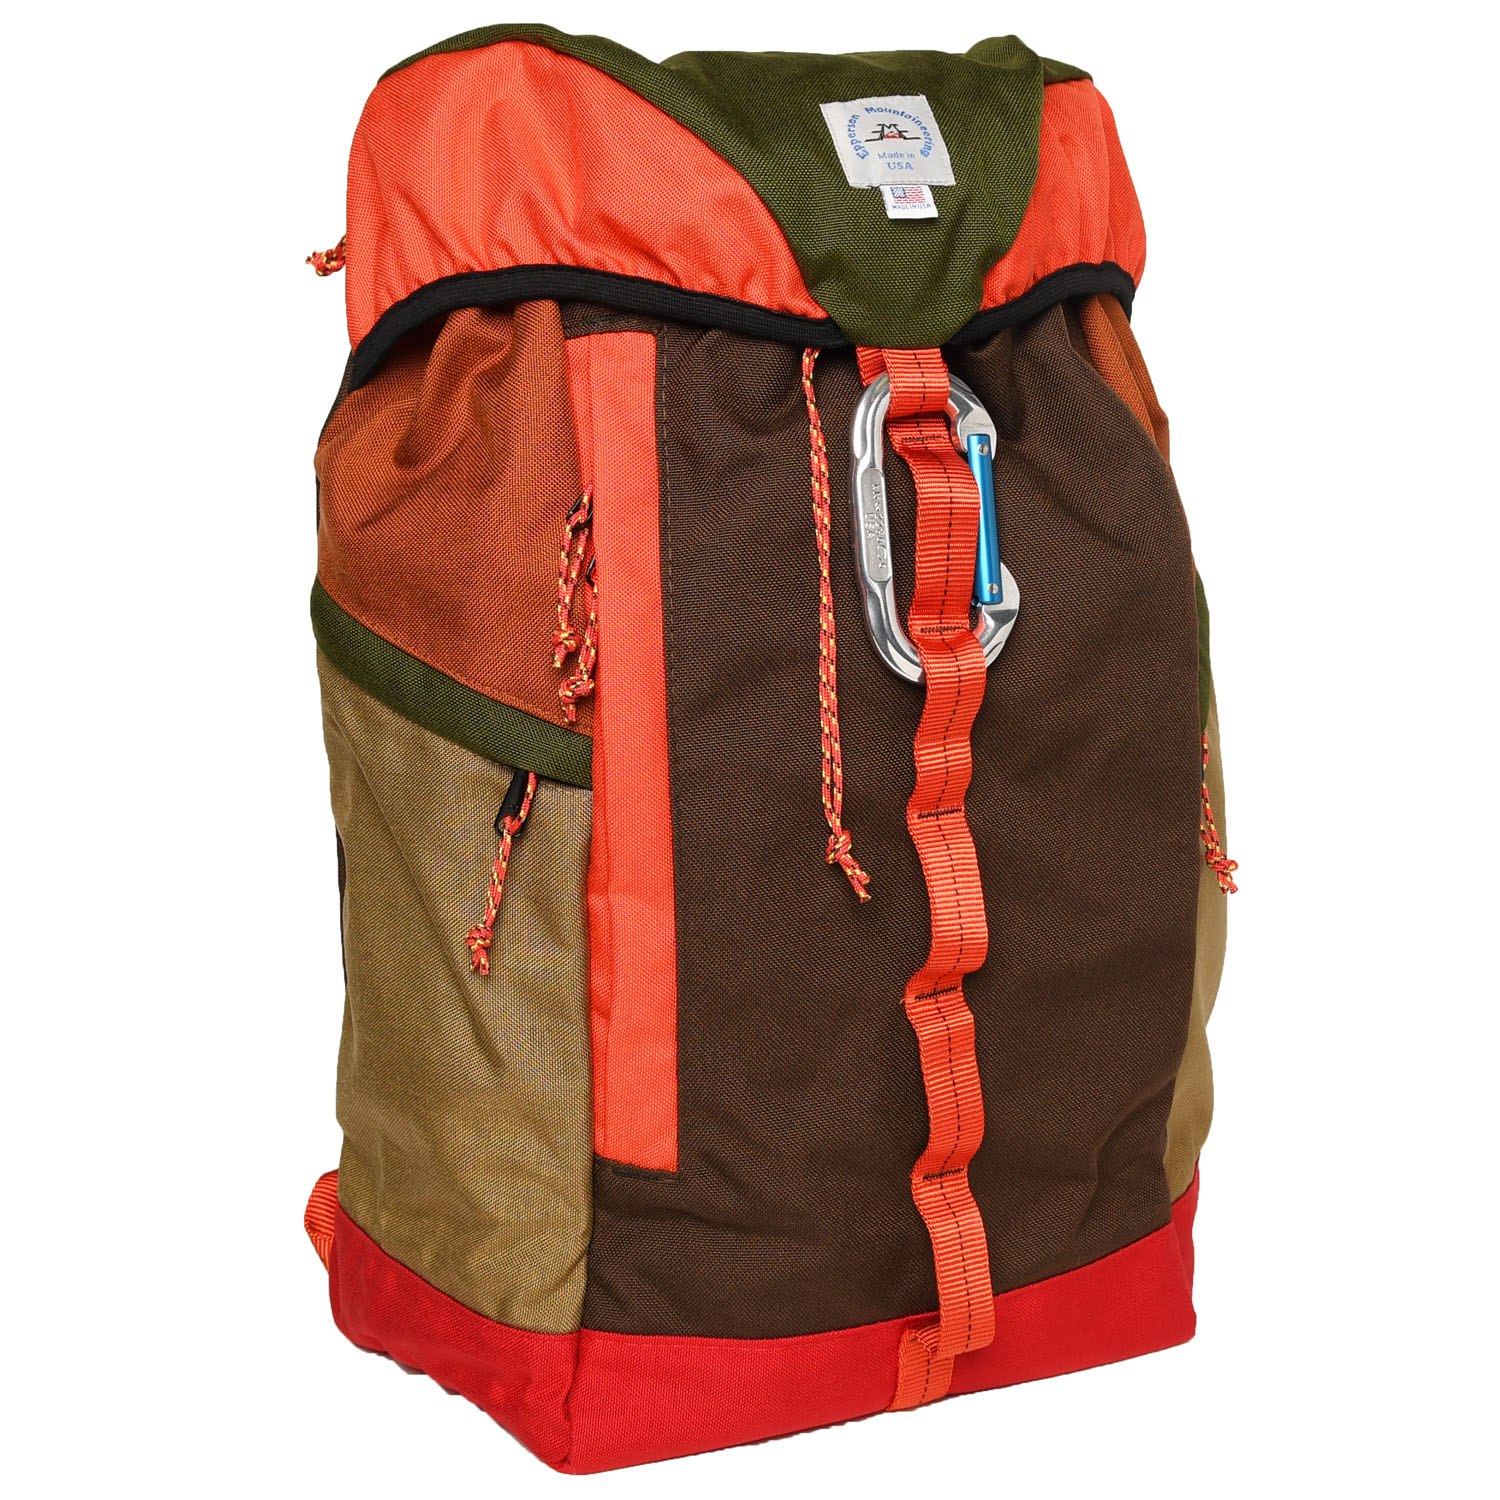 Epperson Mountaineering Large Climb Backpack - Moss / Coffee